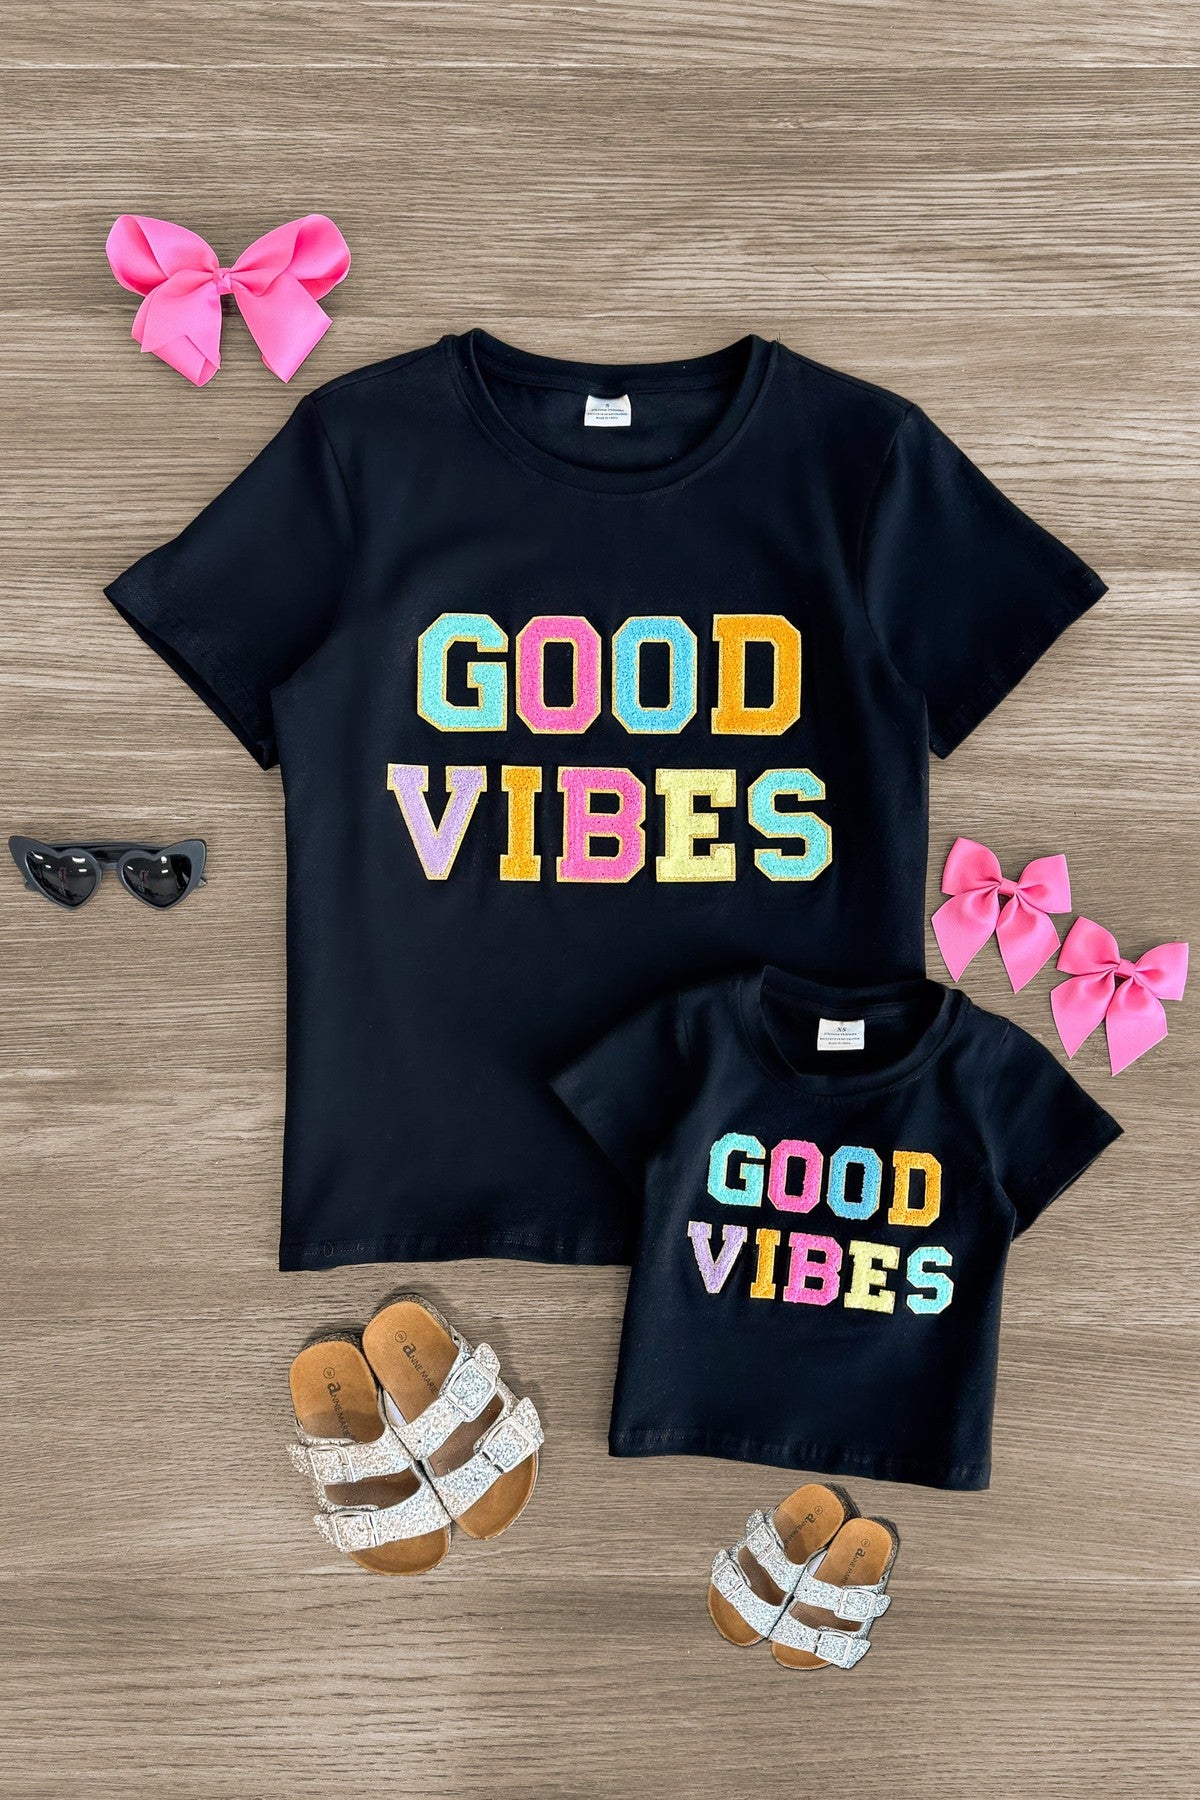 Mom & Me - "Good Vibes" Rainbow Chenille Patch Top - Sparkle in Pink